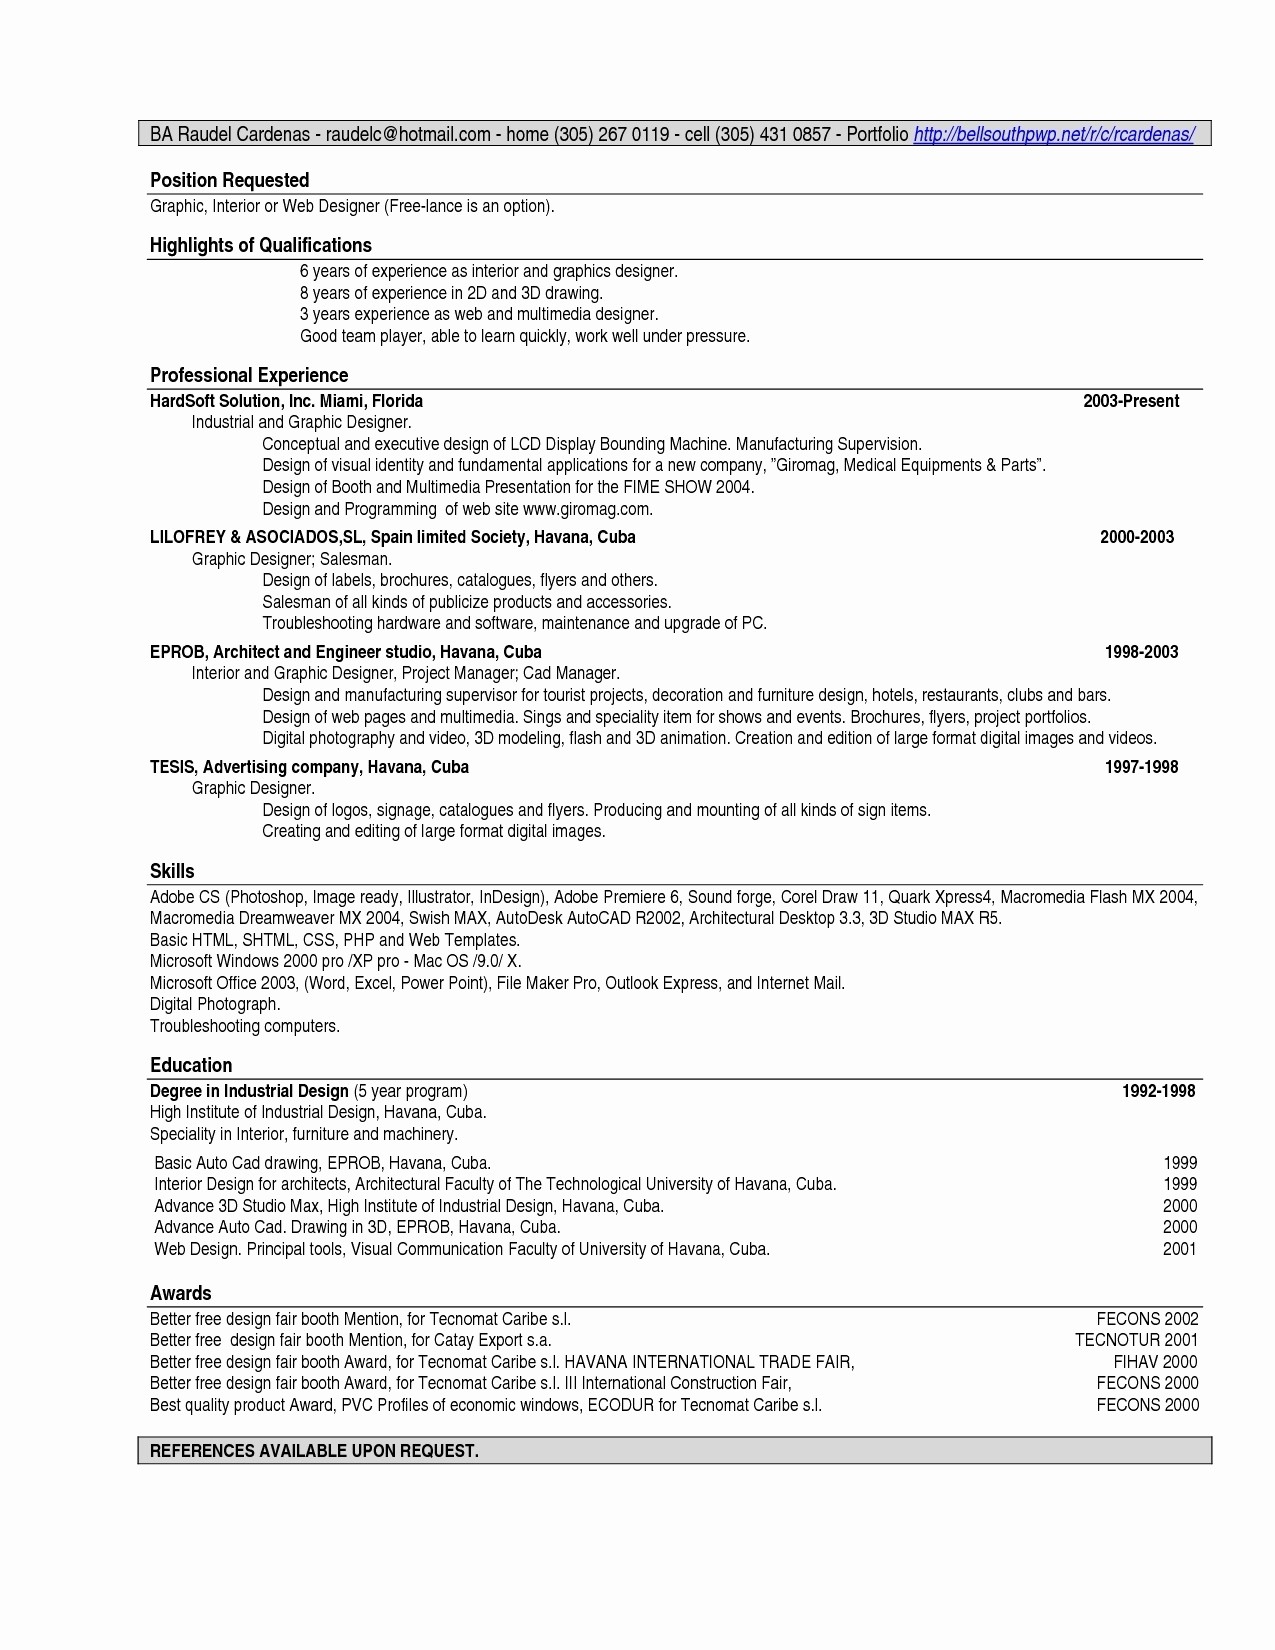 Resume for Internal Promotion Template Unique Resume for Promotion Template Internal Resume Template